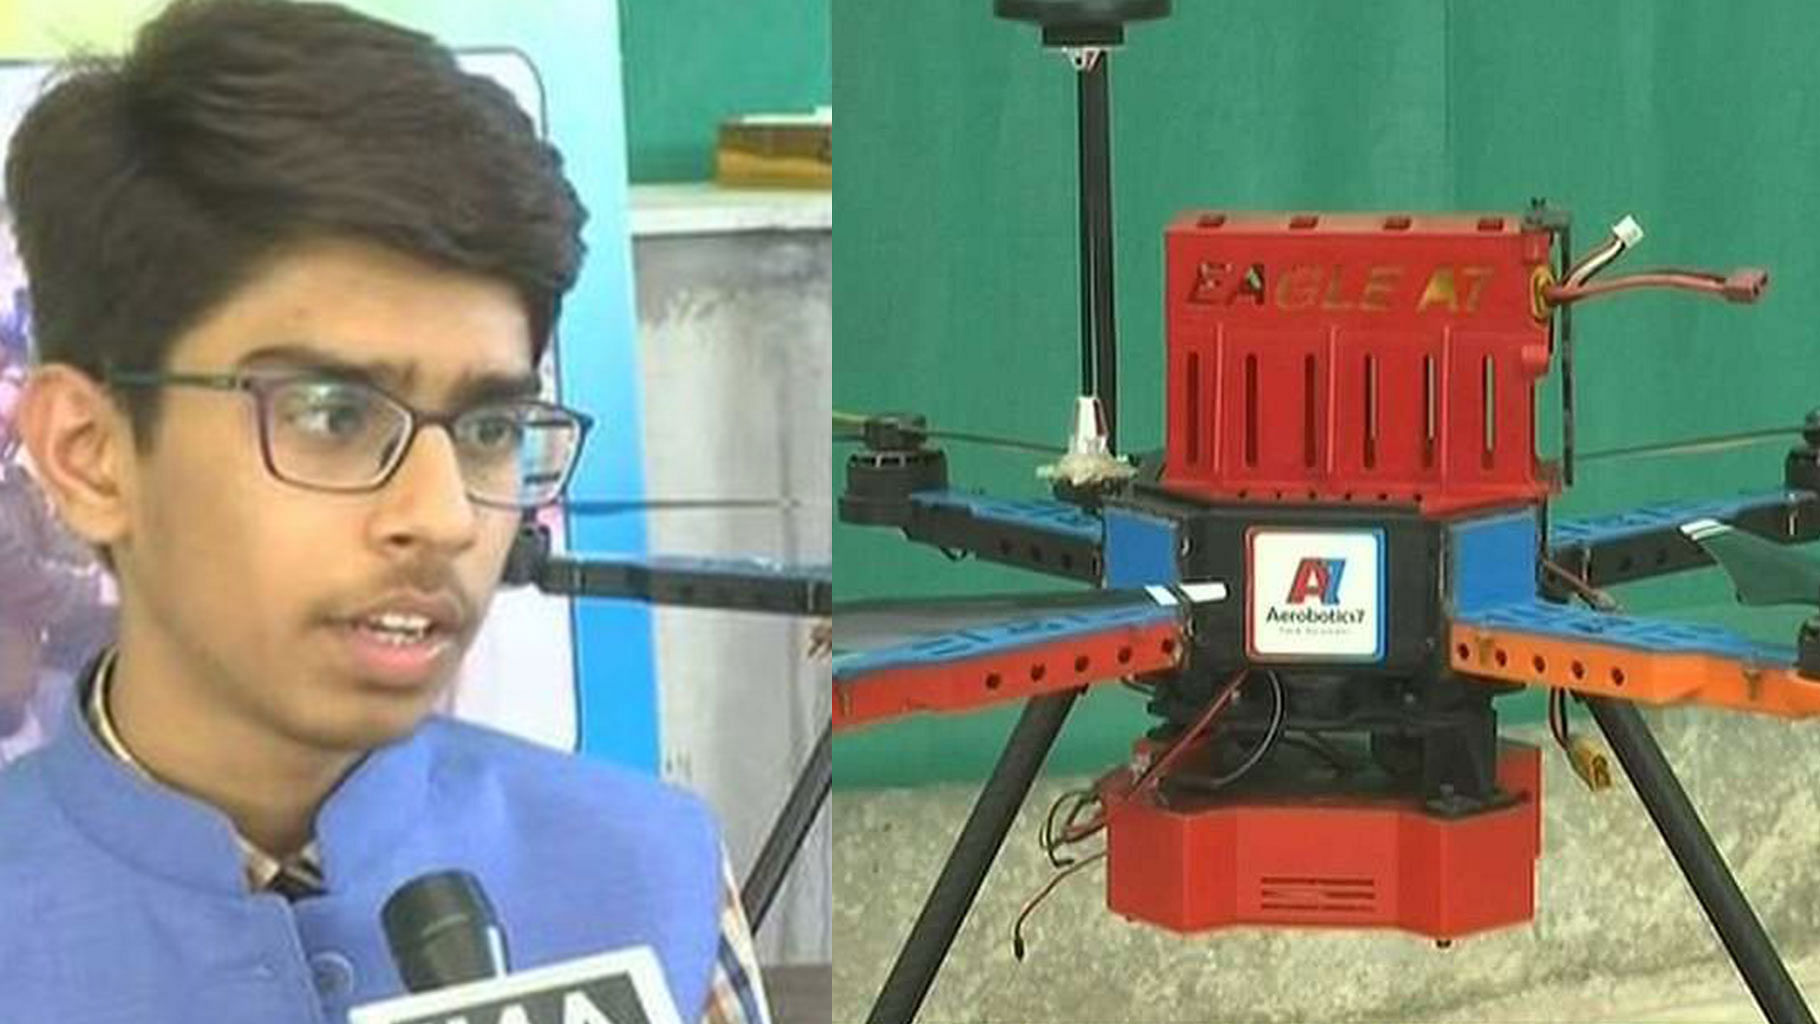 Ahmedabad teen designs a drone to detect and destroy landmines without any risk to human lives.